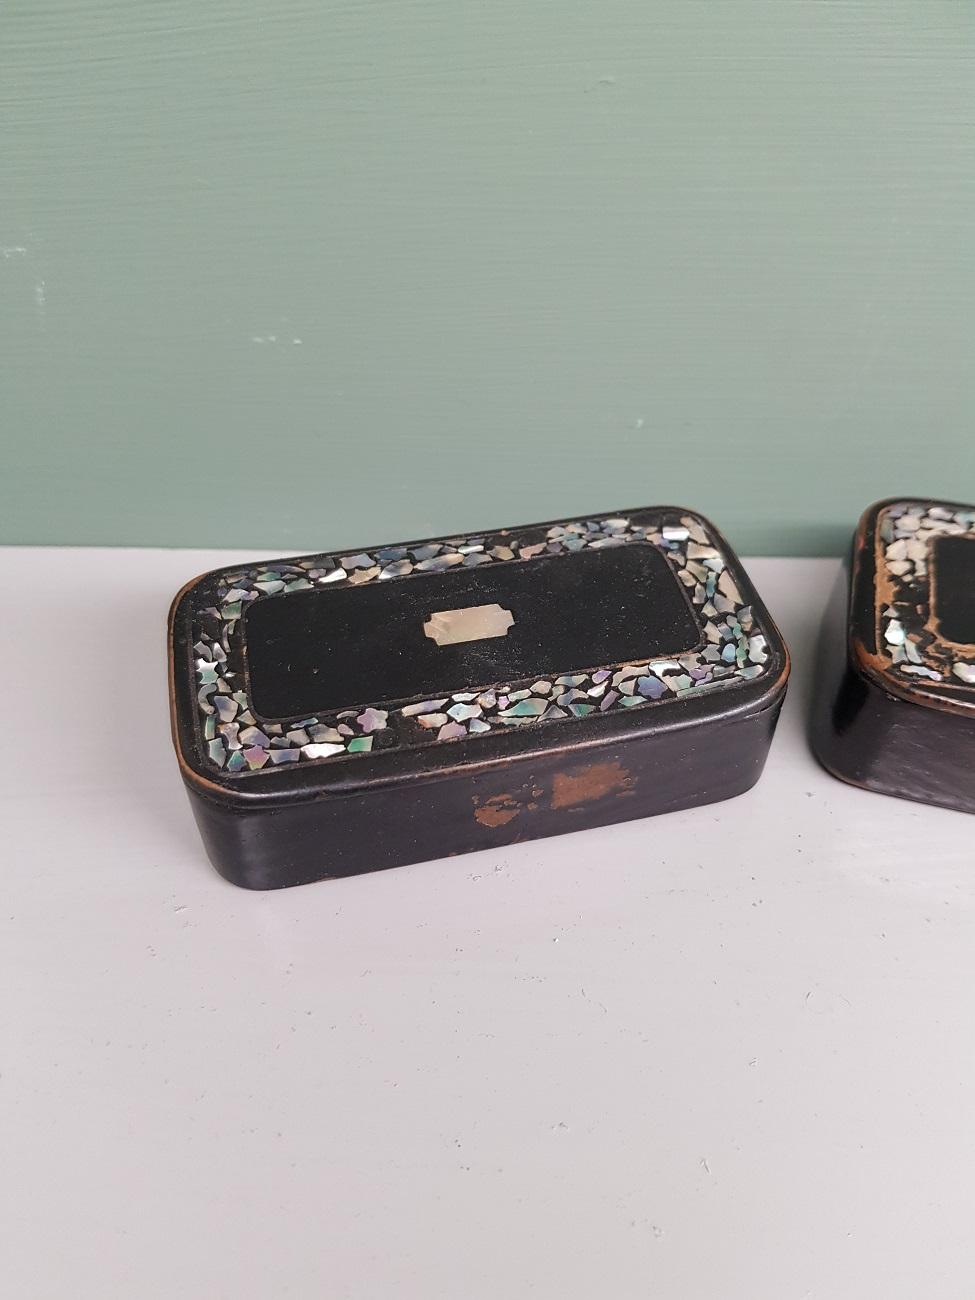 2 old black lacquered snuff boxes inlaid with mother of pearl, from the 19th century.

The measurements are,
Depth 4 cm/ 1.5 inch.
Width 7.5 cm/ 2.9 inch.
Height 2.5 cm/ 0.9 inch.